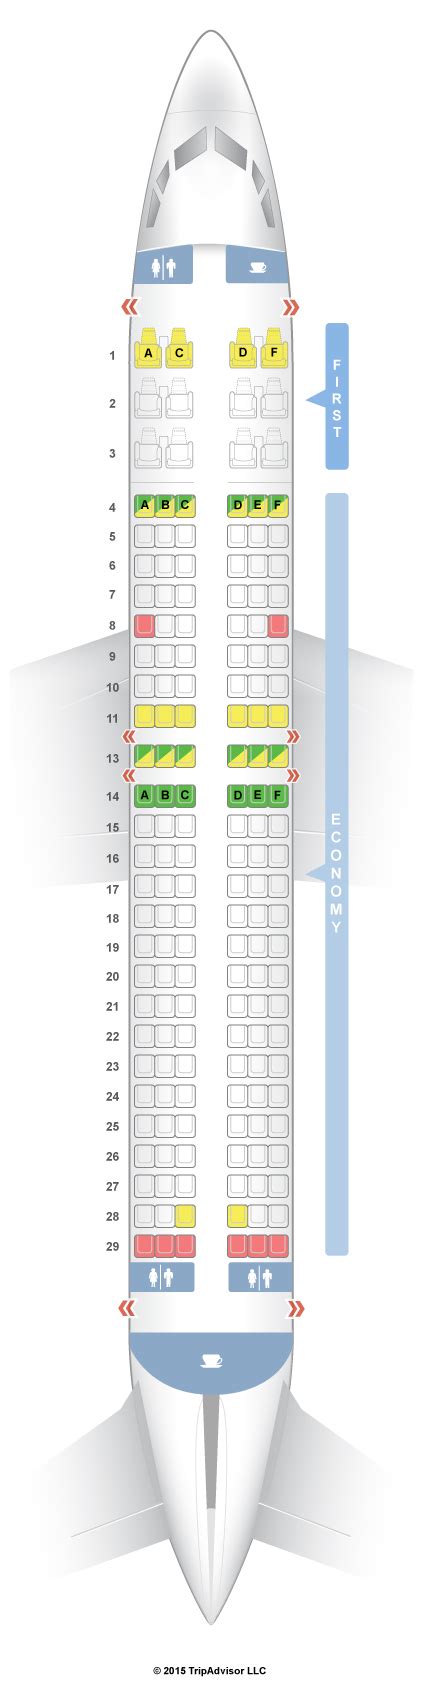 boeing 737-800 seating chart sun country